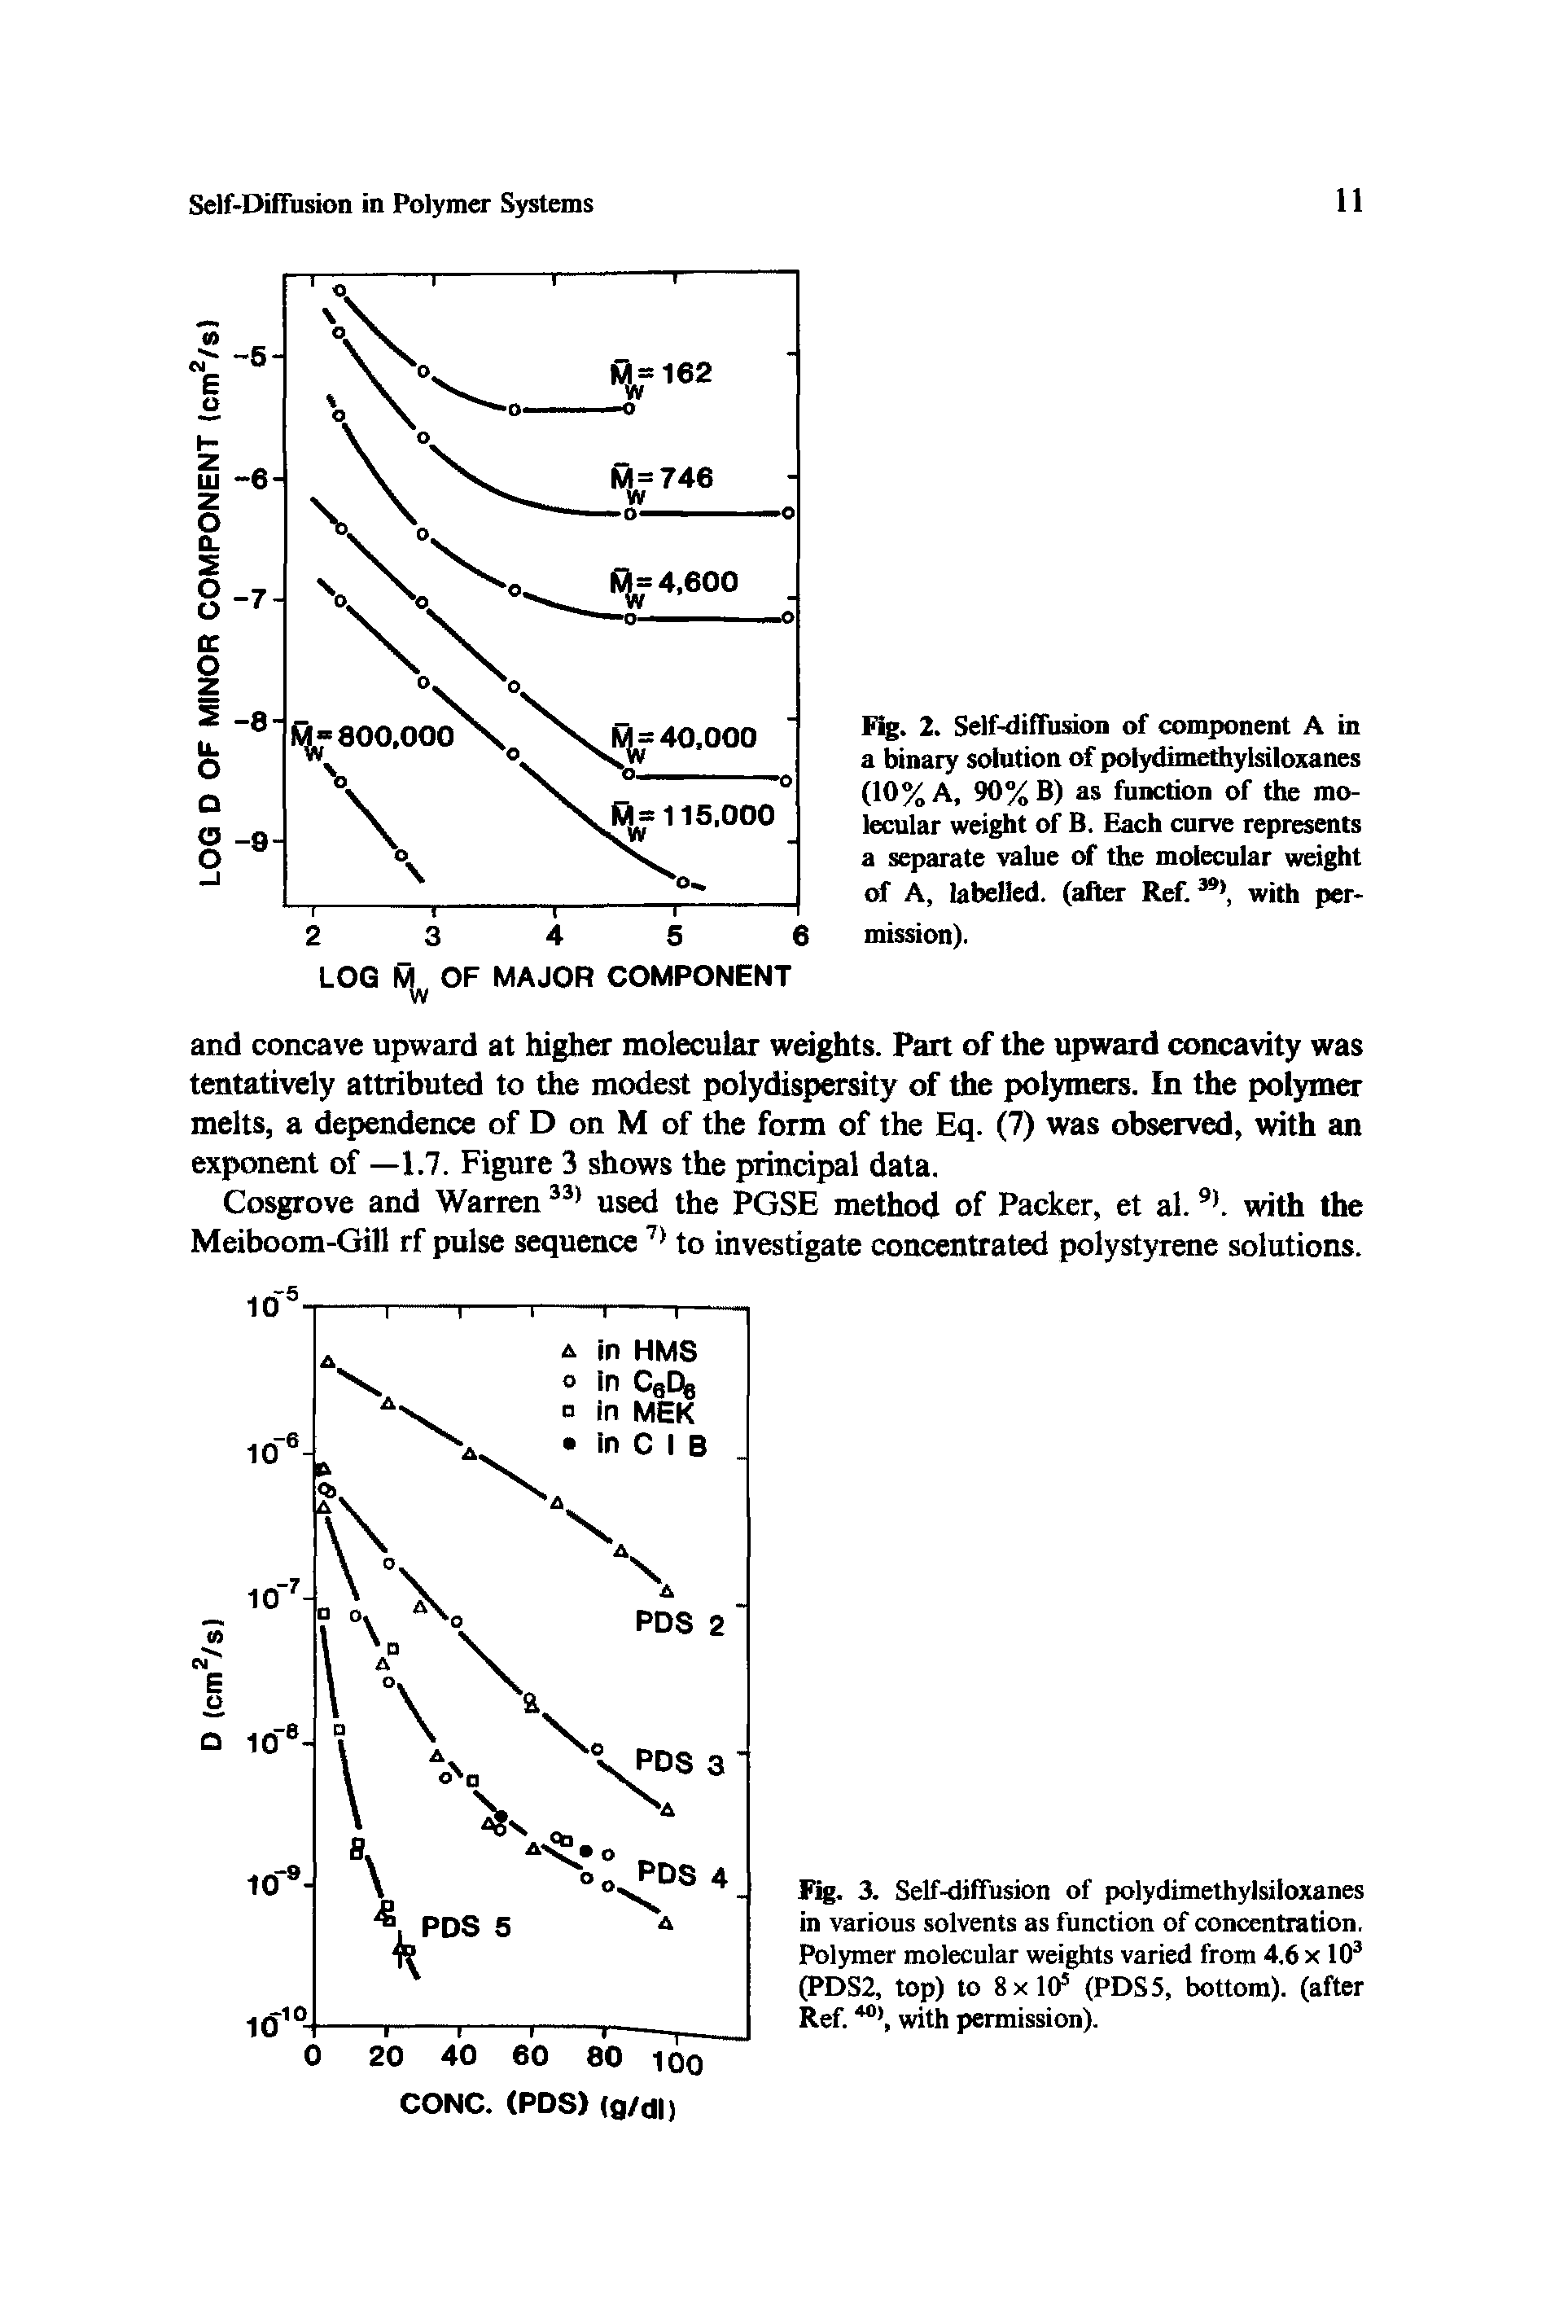 Fig. 3. Self-diffusion of polydimethylsiloxanes in various solvents as function of concentration. Polymer molecular weights varied from 4,6 x 103 (PDS2, top) to 8 x10s (PDS5, bottom), (after Ref. with permission).